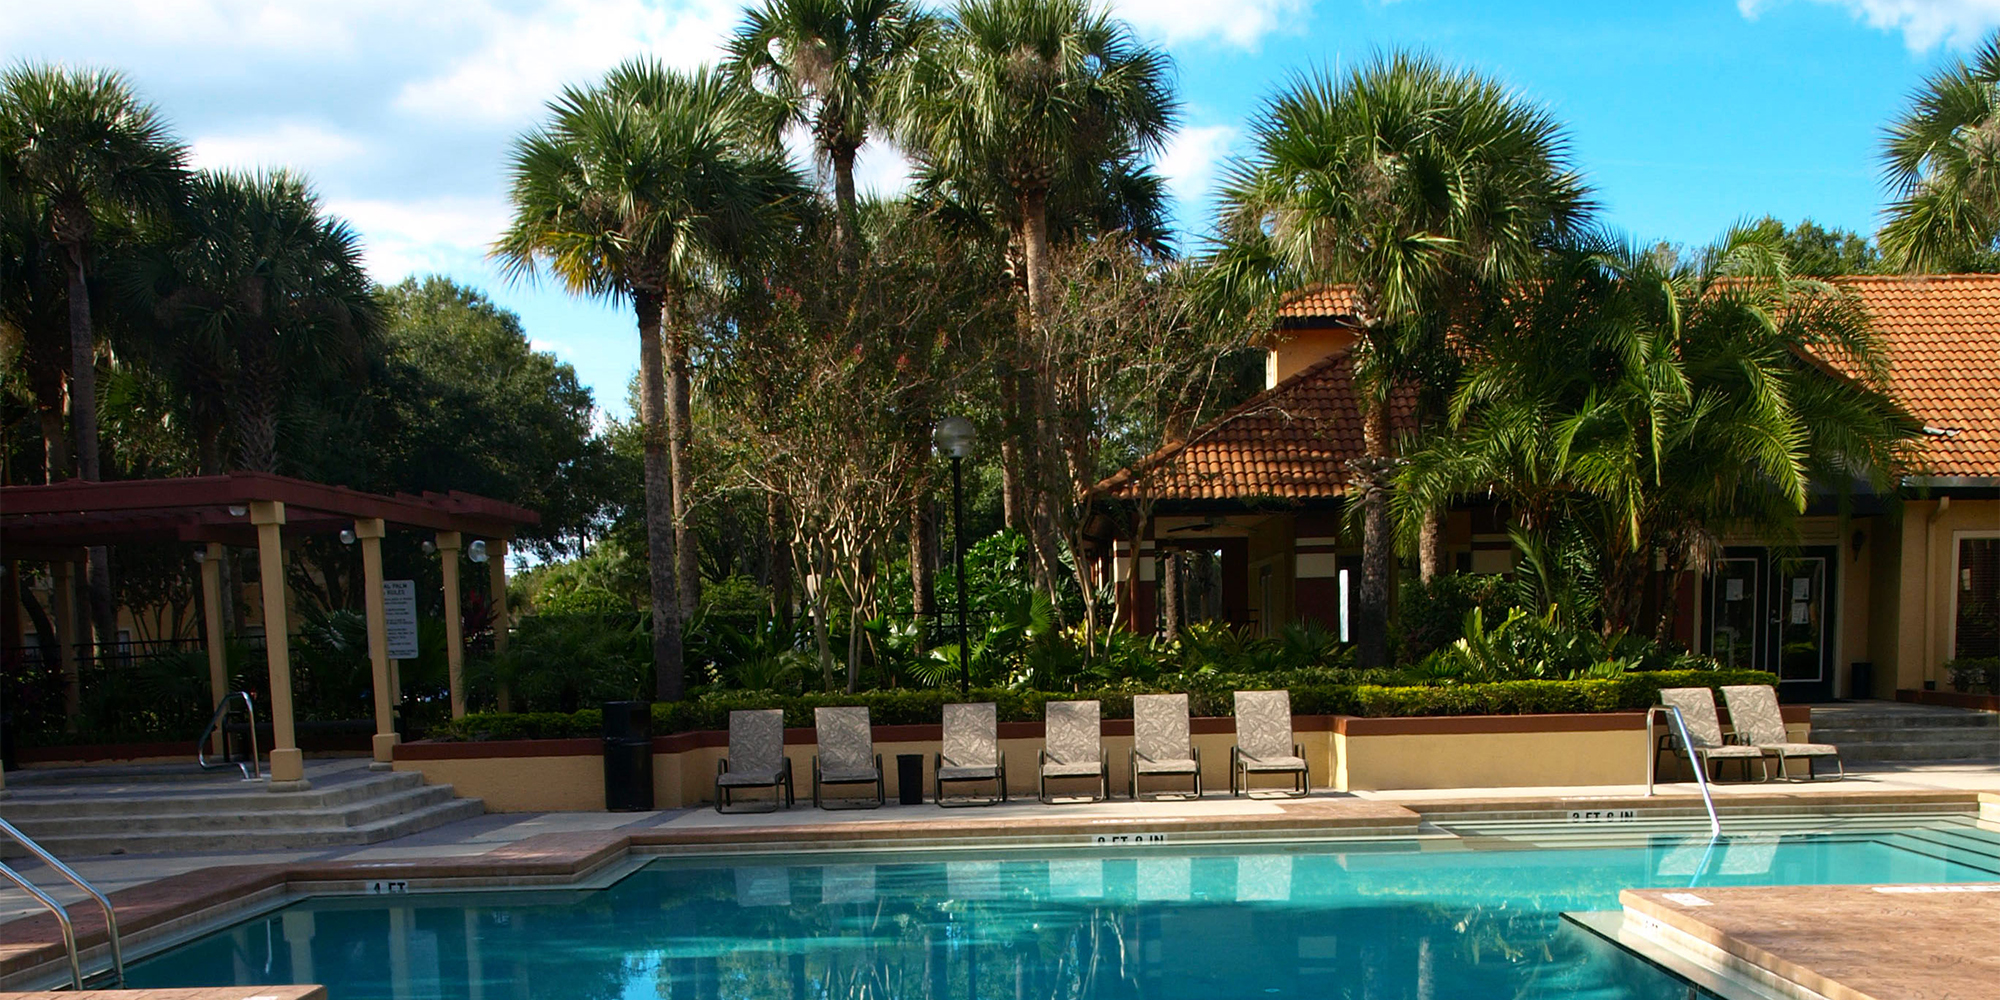 Beautiful Resort style apartment complexes in Florida